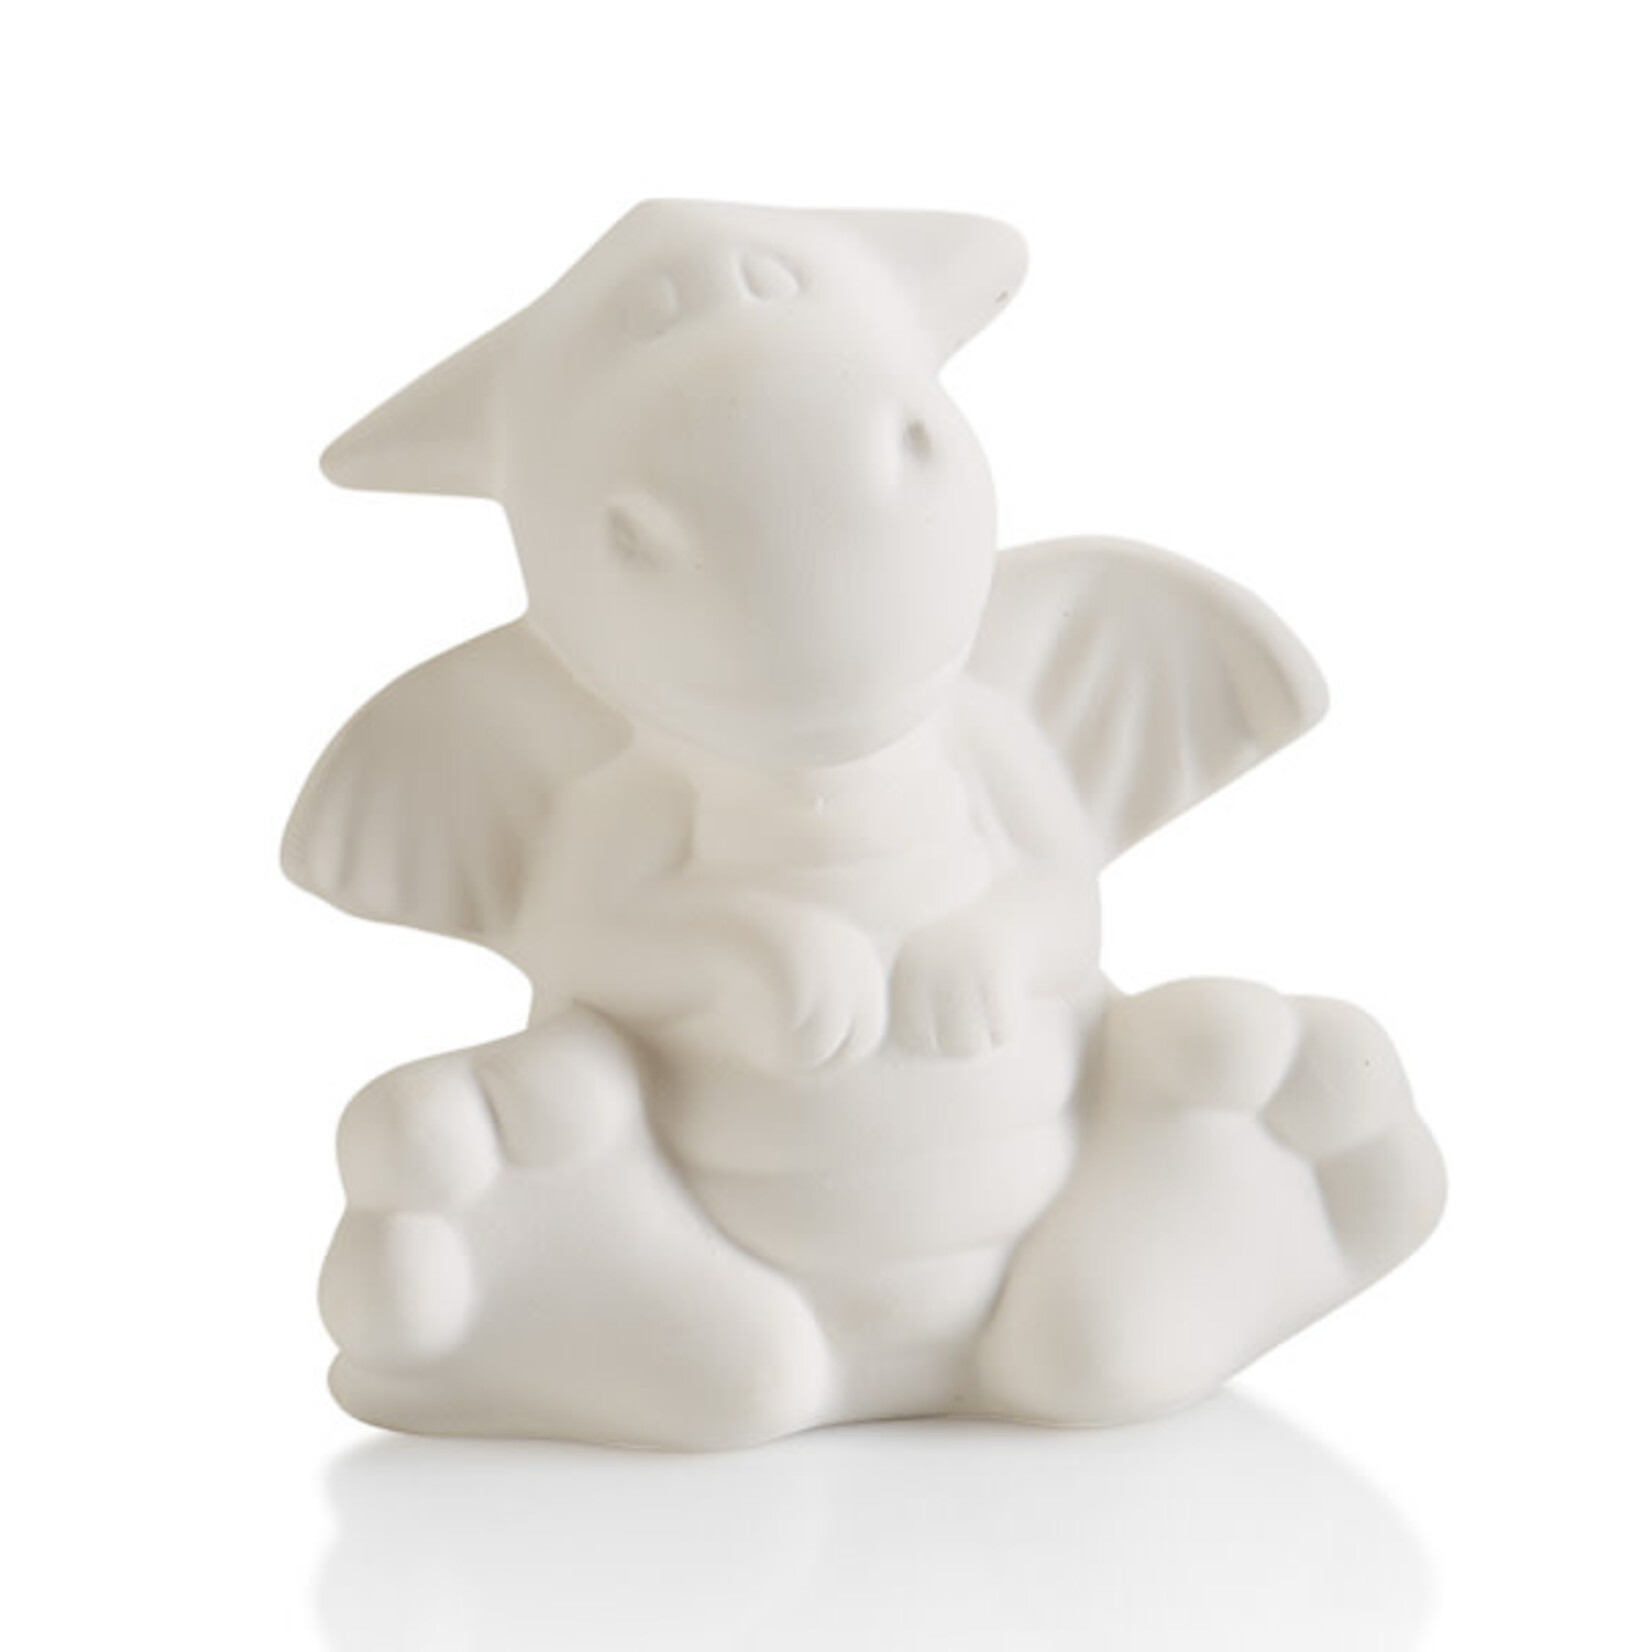 Winged Dragon Collectible - 3.5W x 3.25H